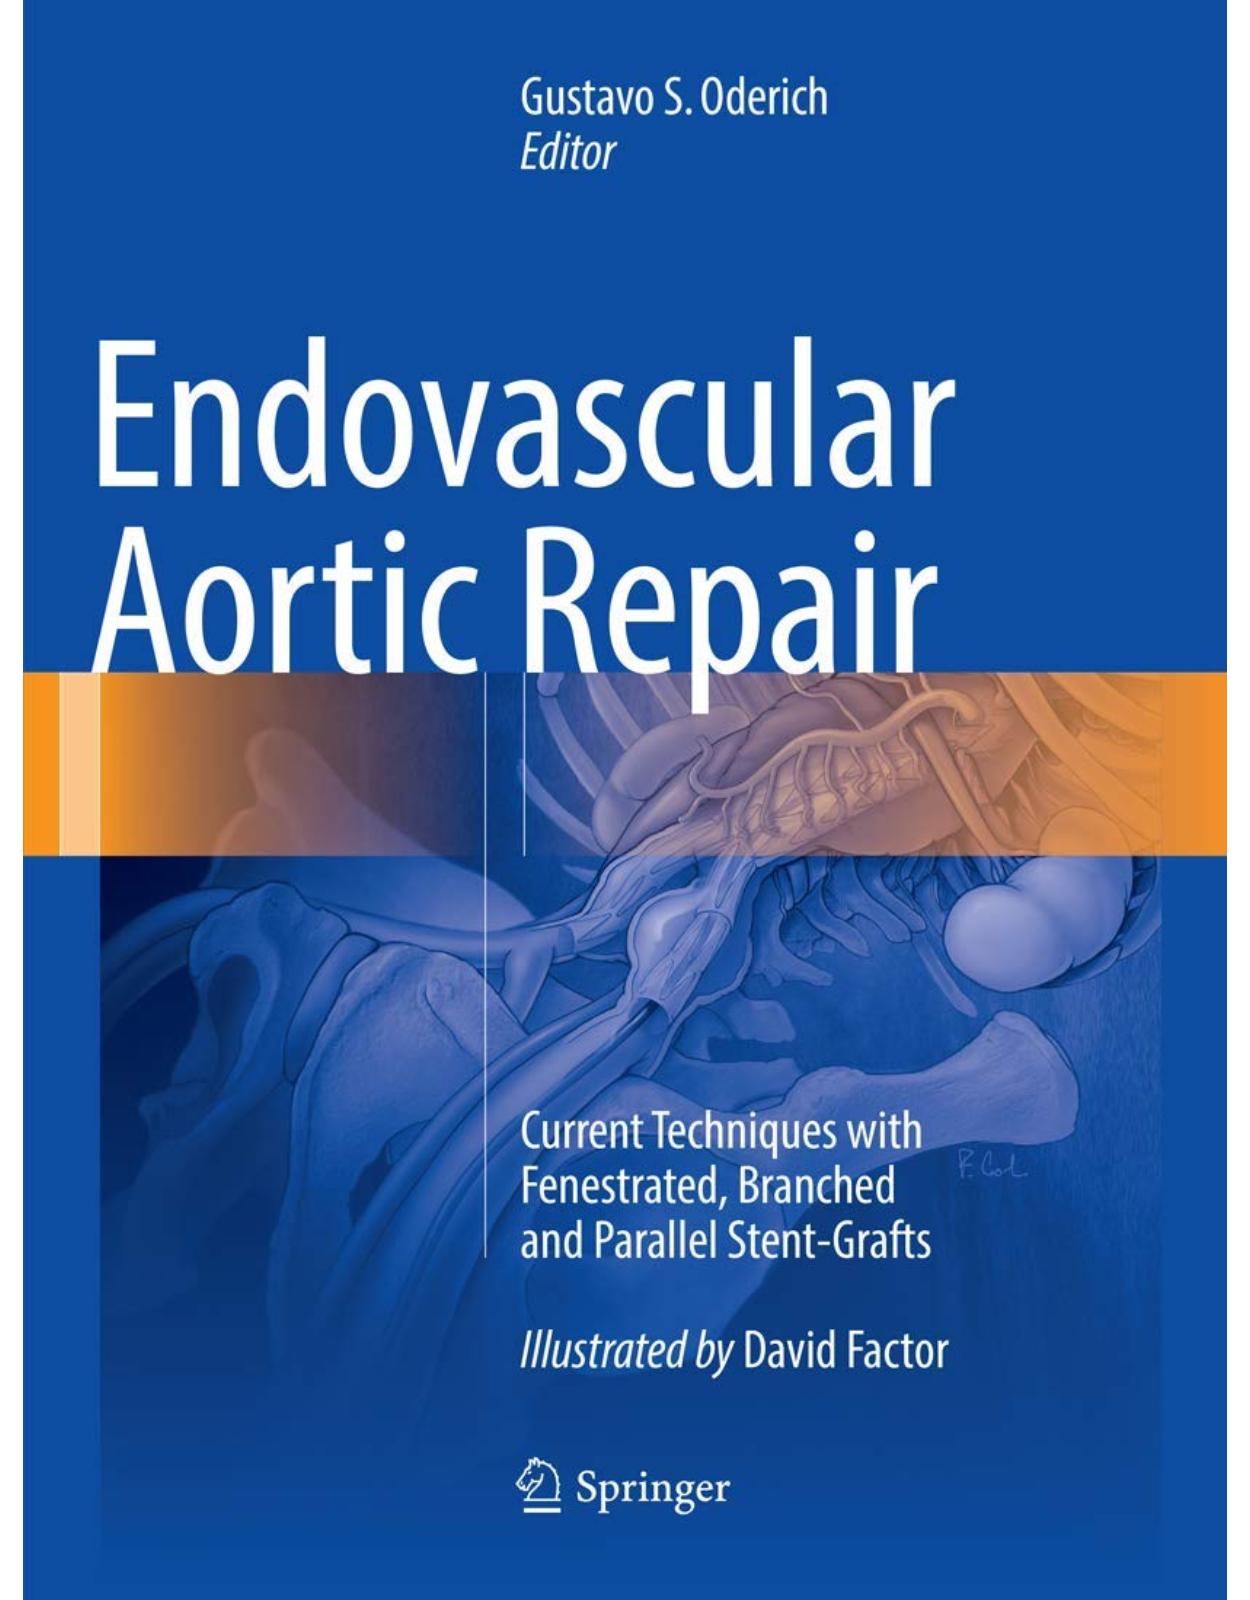 Endovascular Aortic Repair: Current Techniques with Fenestrated, Branched and Parallel Stent-Grafts